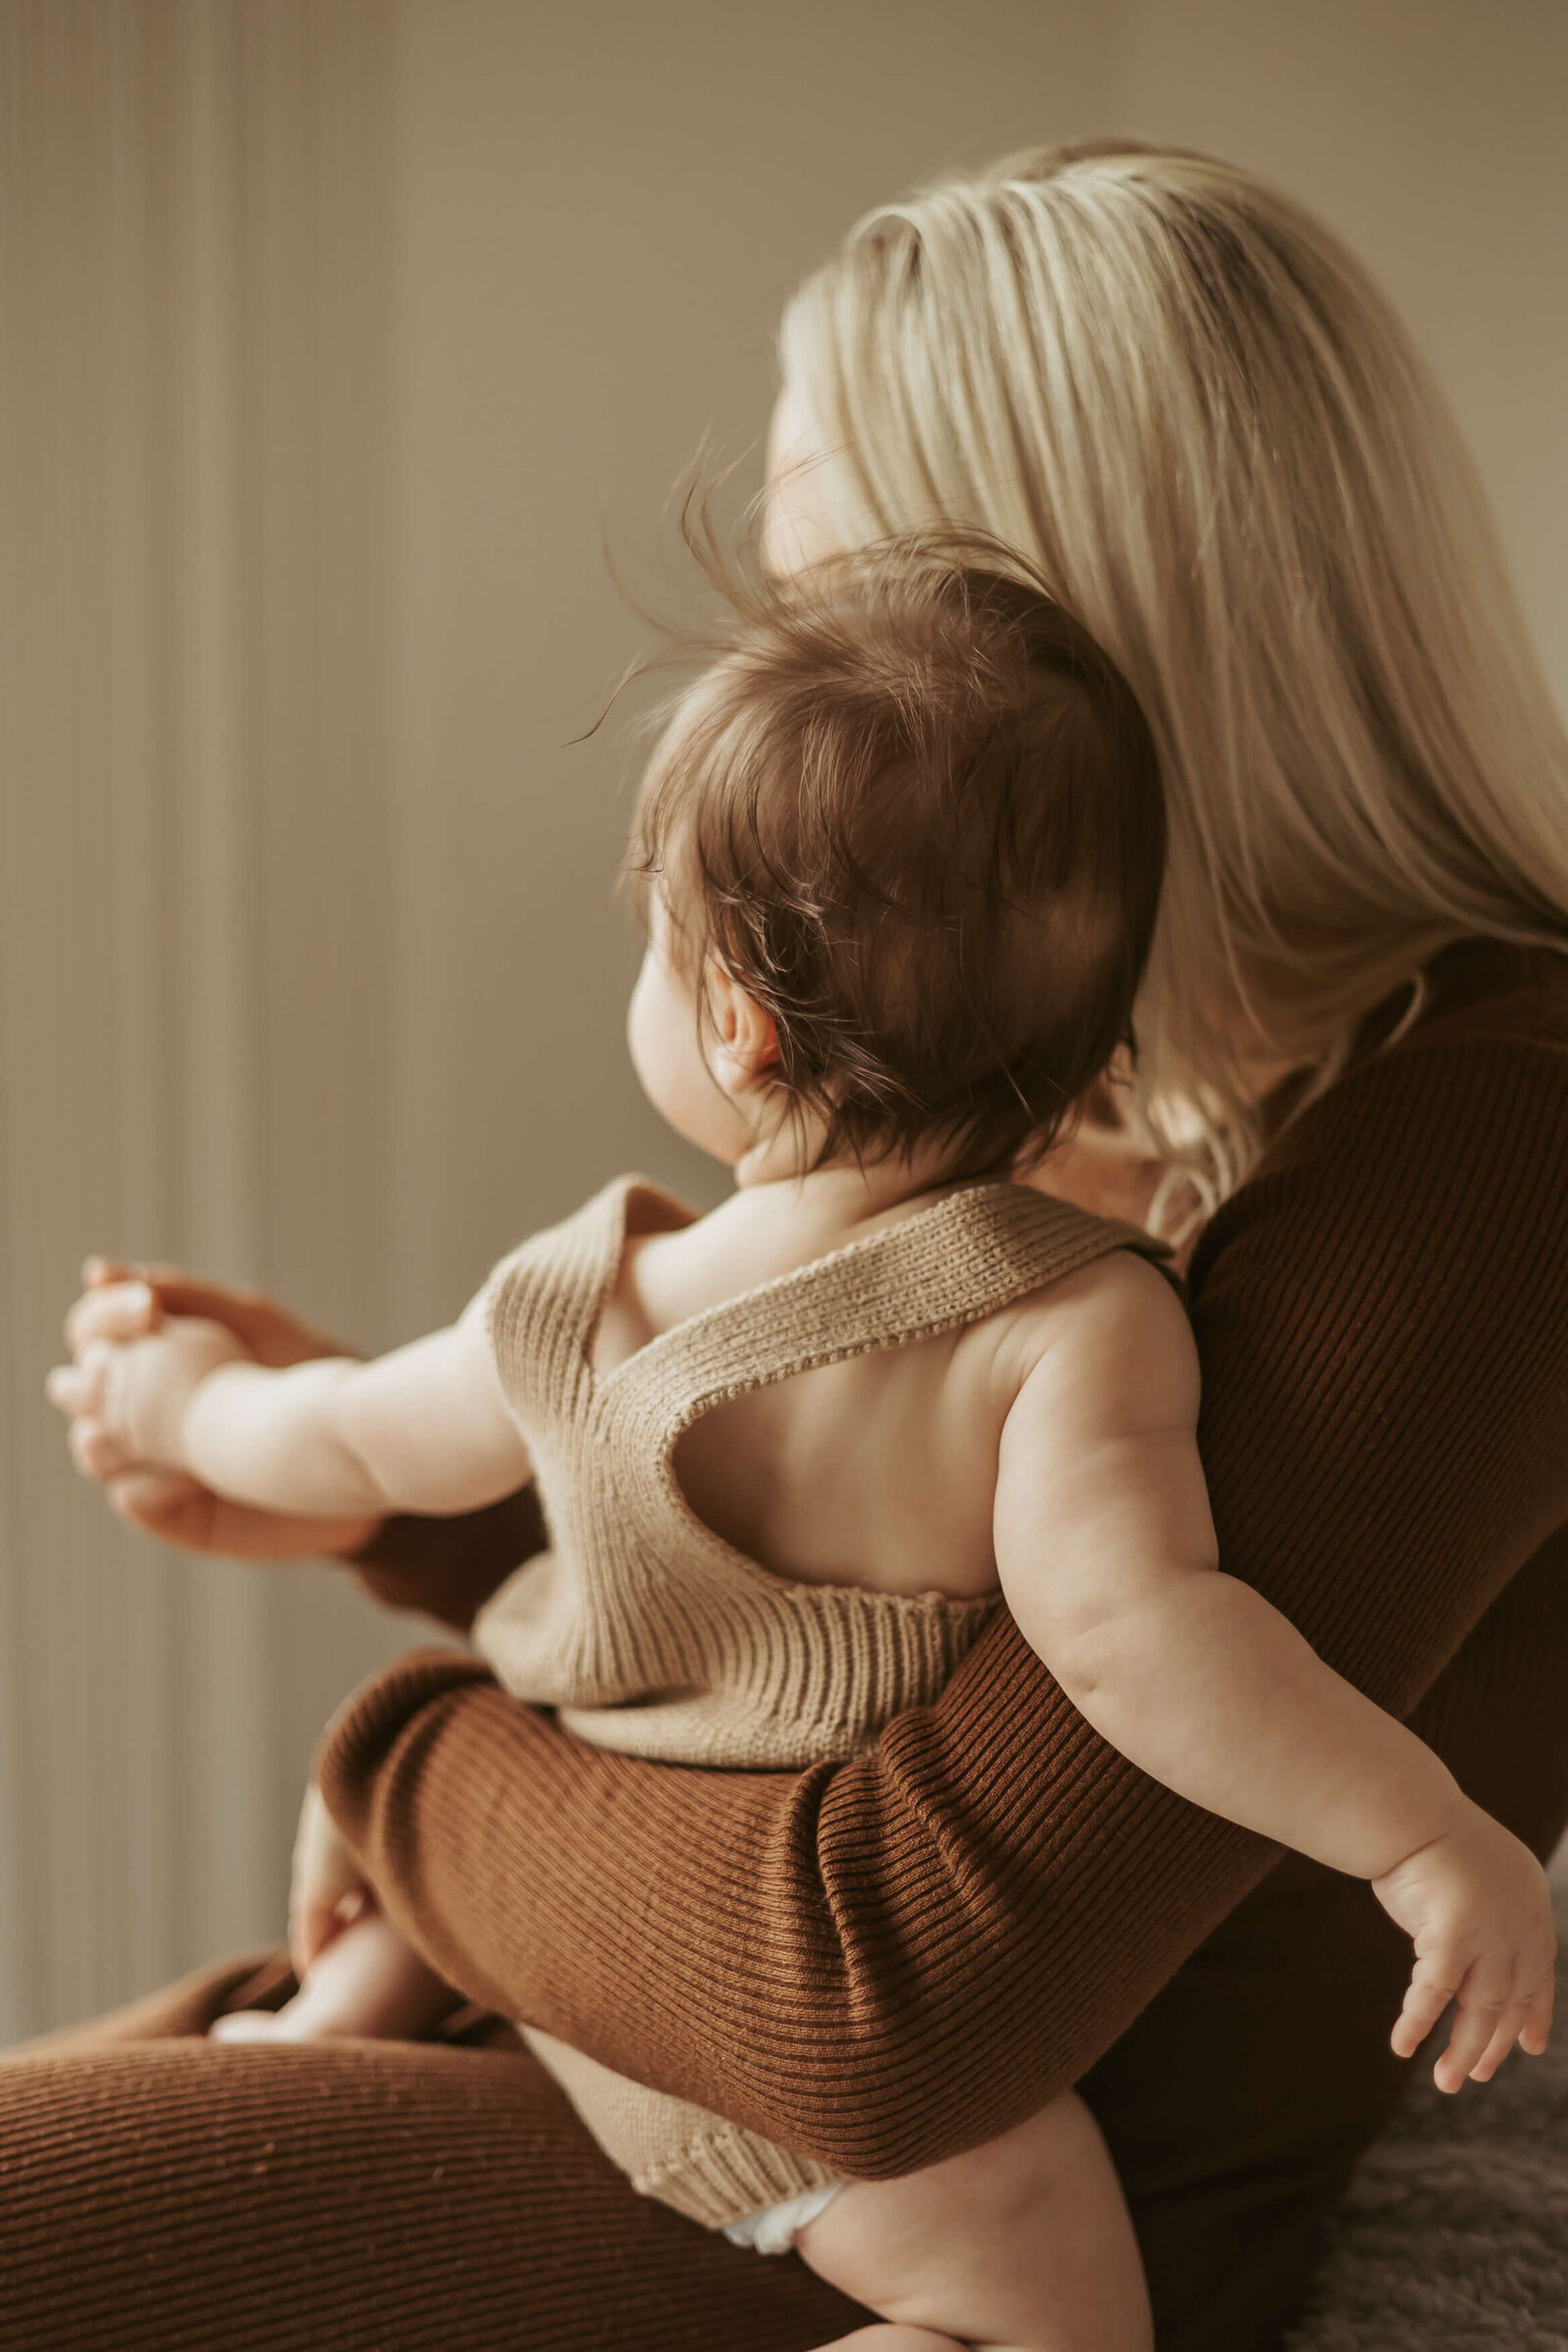 A beautiful mum with blonde hair and wearing a long-sleeve brown dress is holding her baby while they look out the window.